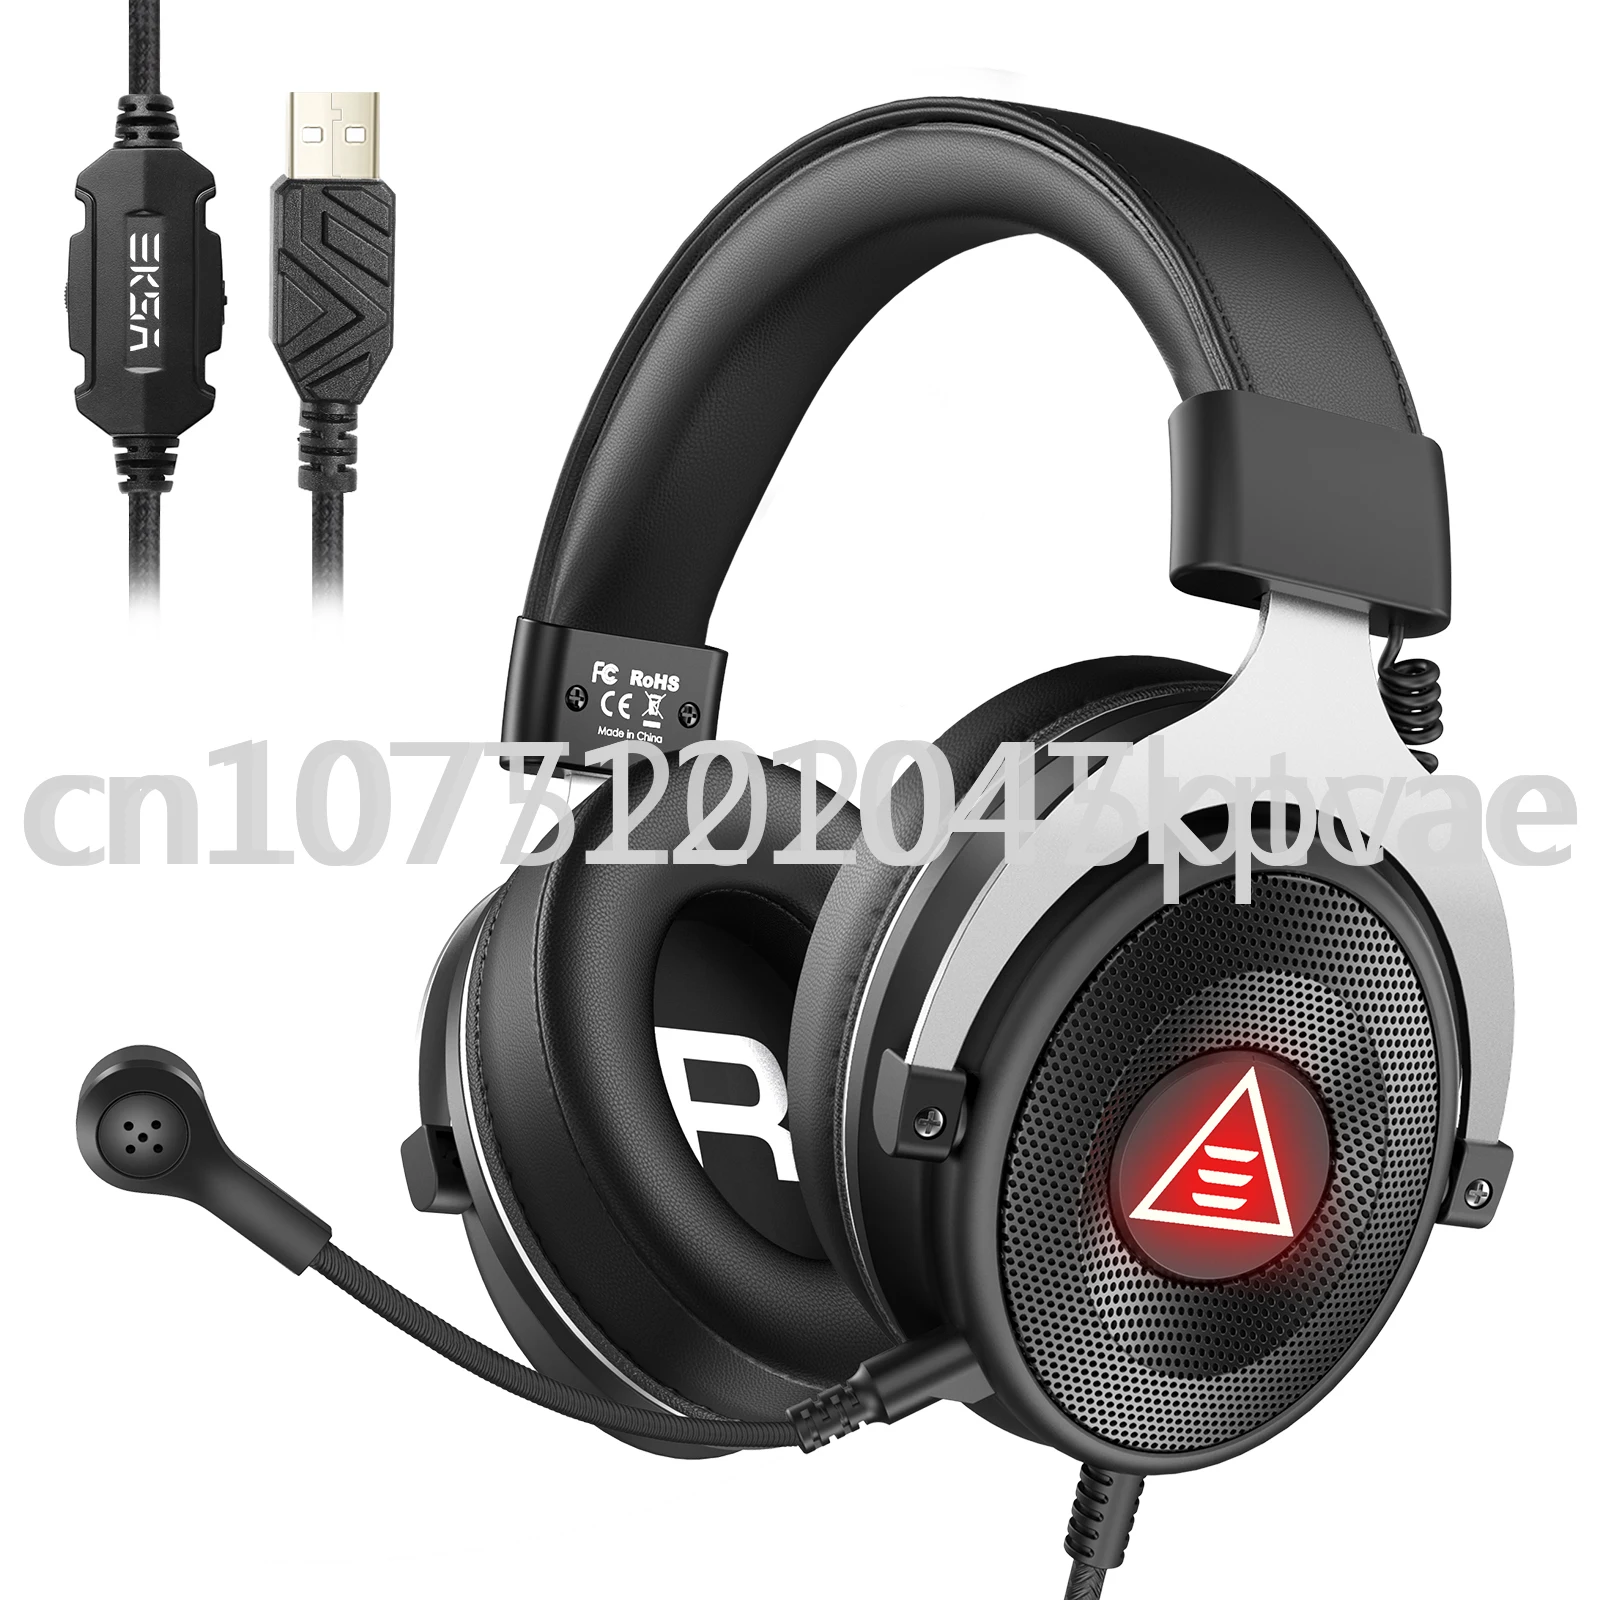 

EKSA Gaming Headset E900 plus Headset 7.1 Surround Sound Wired Headphones LED USB 3.5mm Headset Gamer For Xbox PC PS4